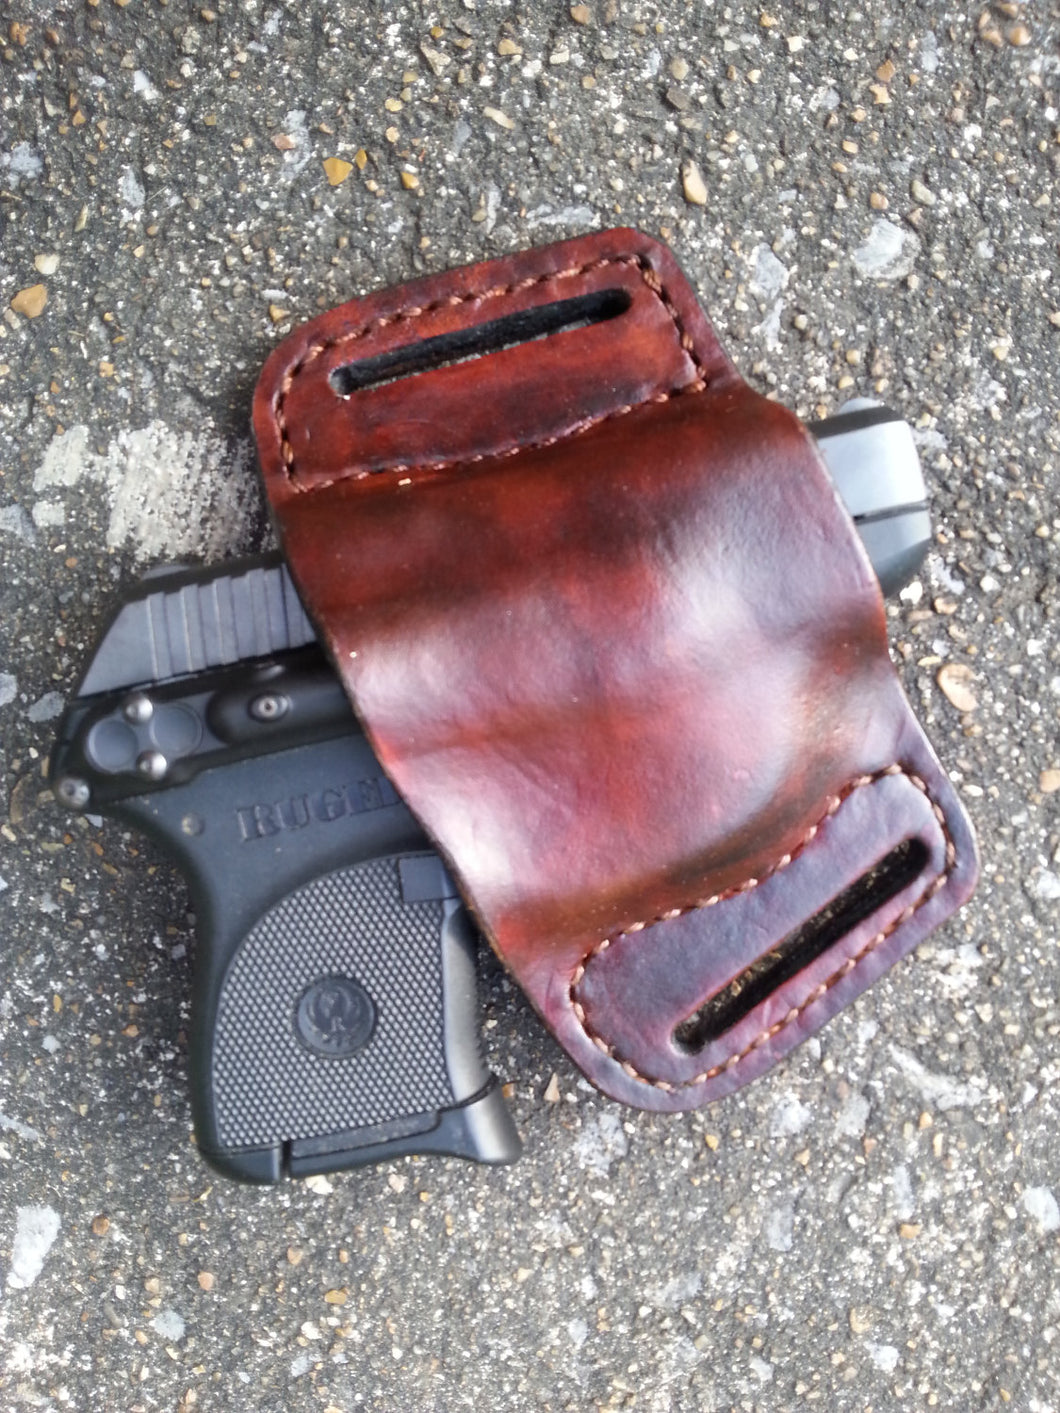 Handmade Leather Pancake Holster for Semi-Automatic Pistols - Three Sizes - Perfect Gift for Father's Day, Christmas, or Birthday!